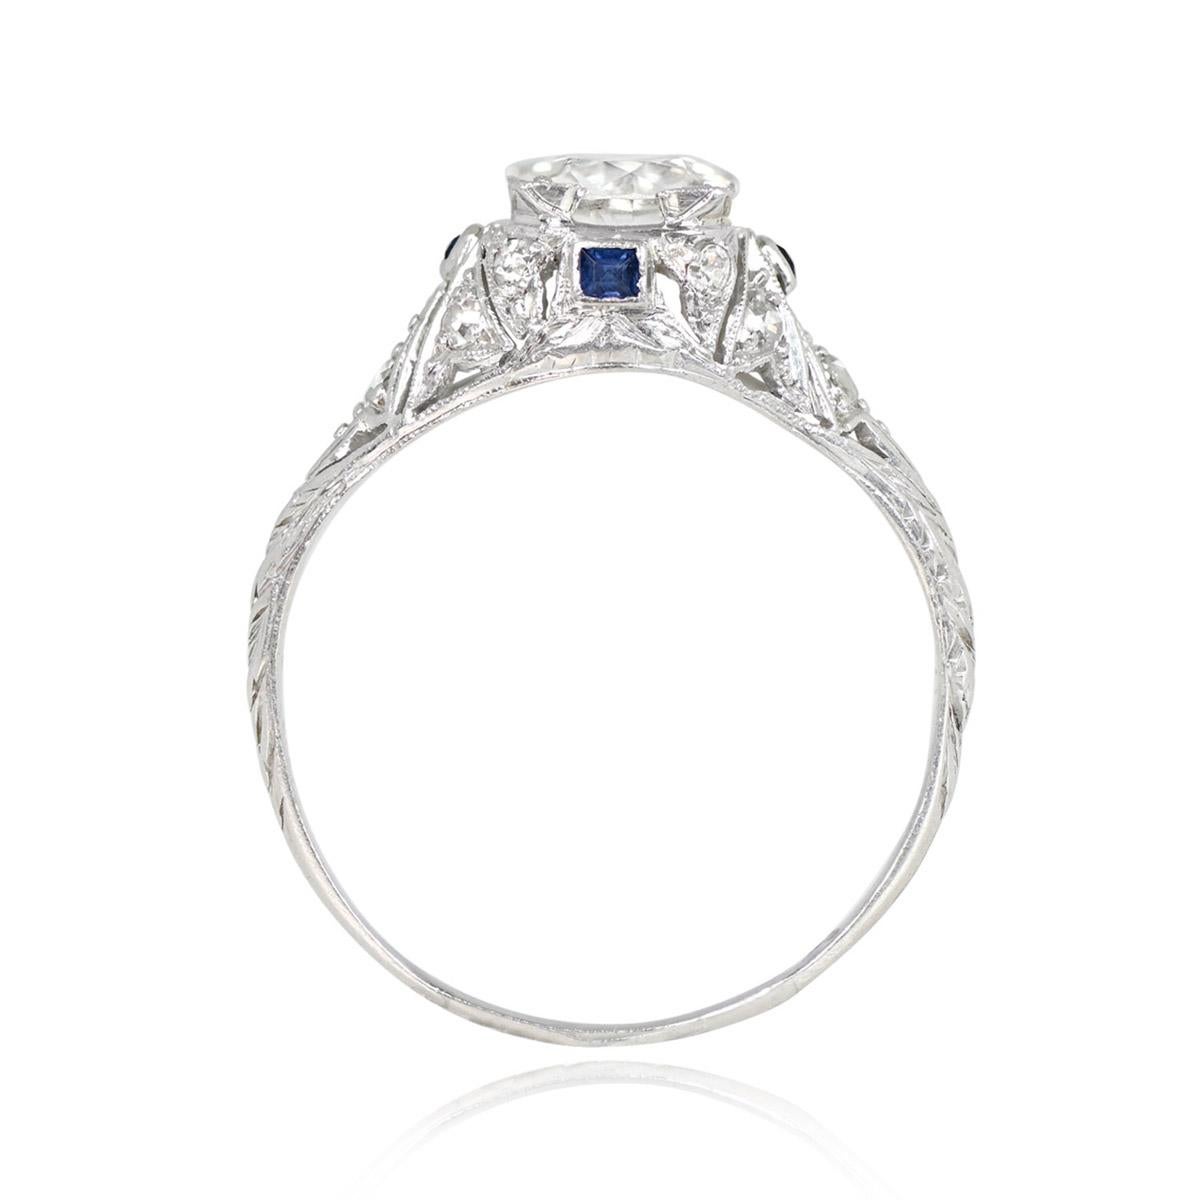 An impressive original Art Deco diamond engagement ring that centers a 1.20-carat old European cut diamond, J color, and SI2 clarity. The center diamond is set in box prongs and hand-crafted in a platinum mounting.  The shank features beautiful hand